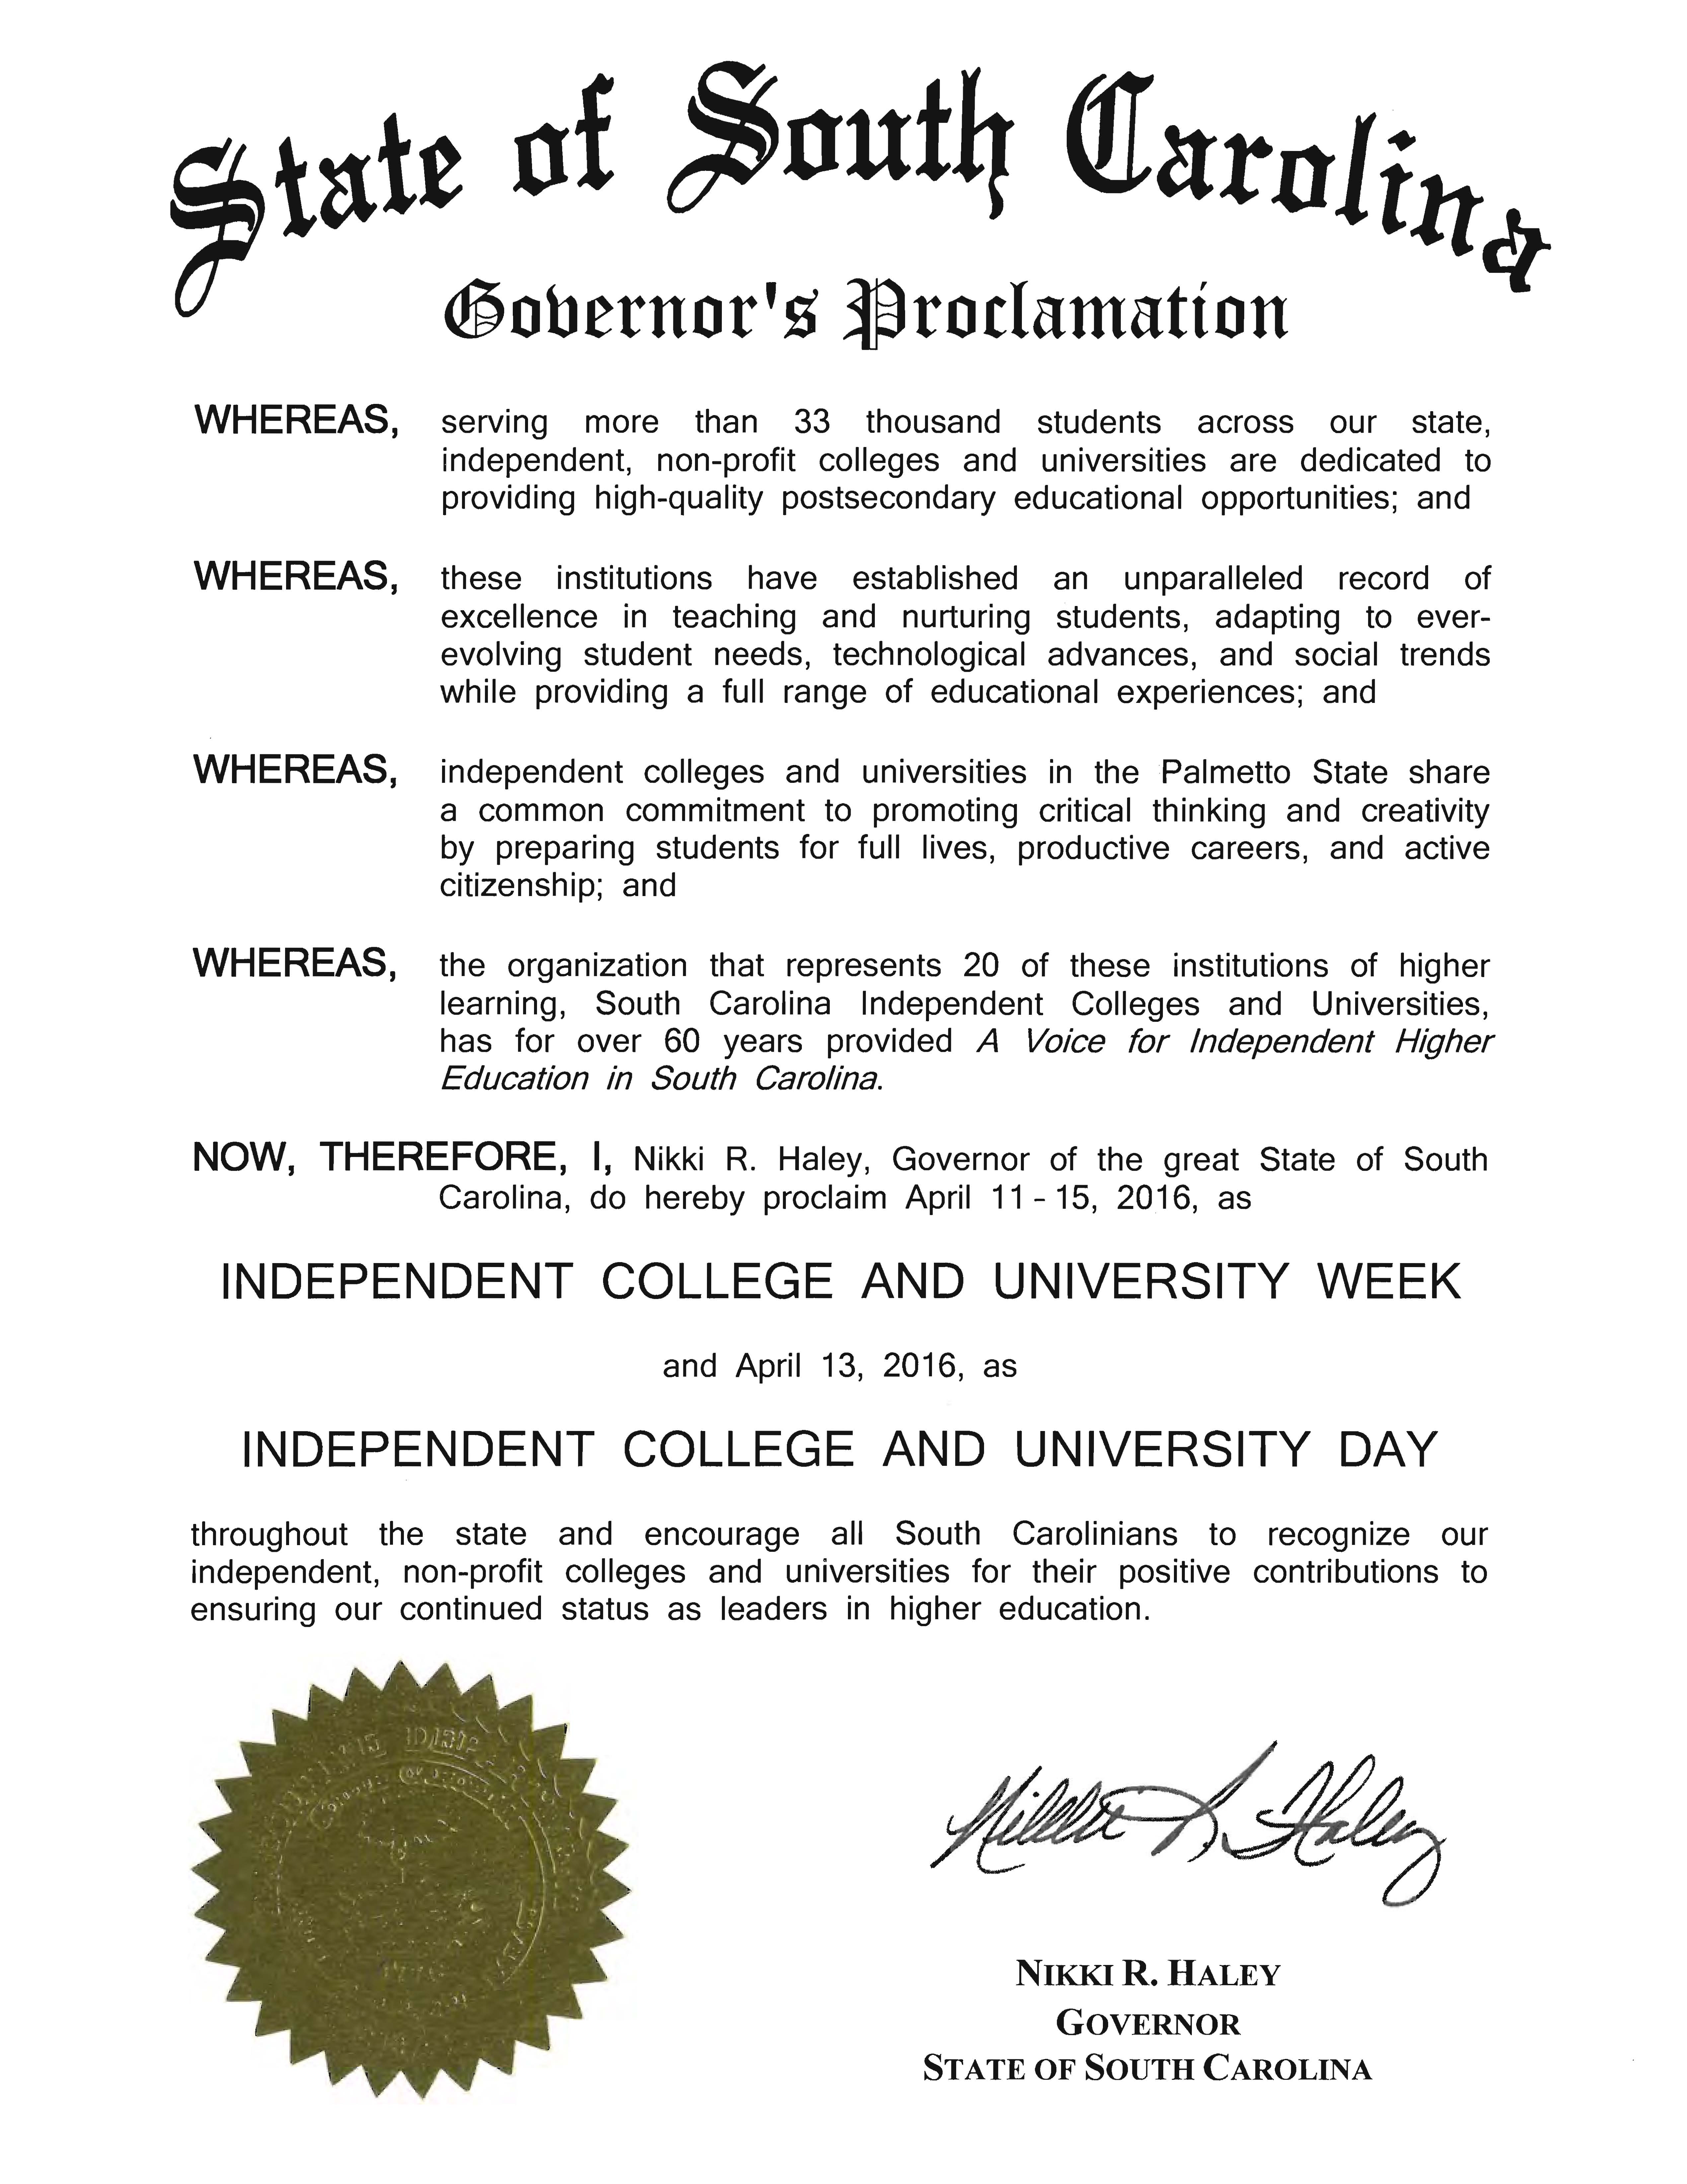 Governor Haley Proclamation - 2016 Independent College and University Week